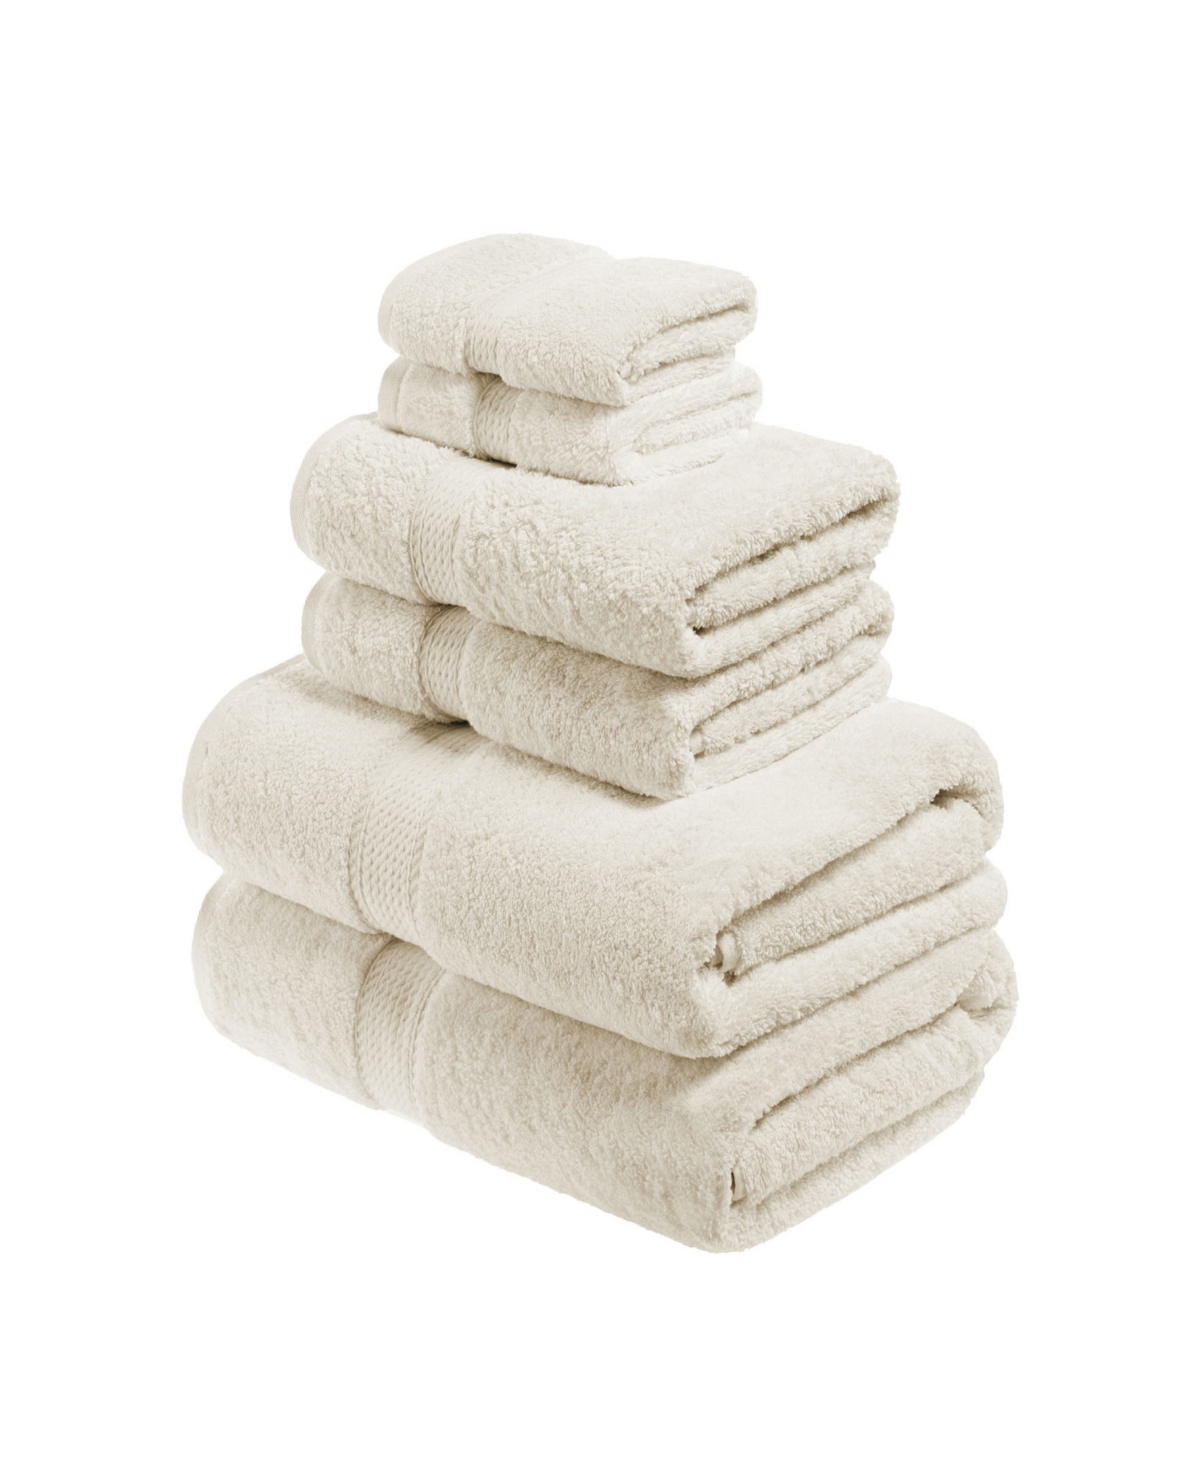 Superior Highly Absorbent 6 Piece Egyptian Cotton Ultra Plush Solid Assorted Bath Towel Set Bedding In Cream